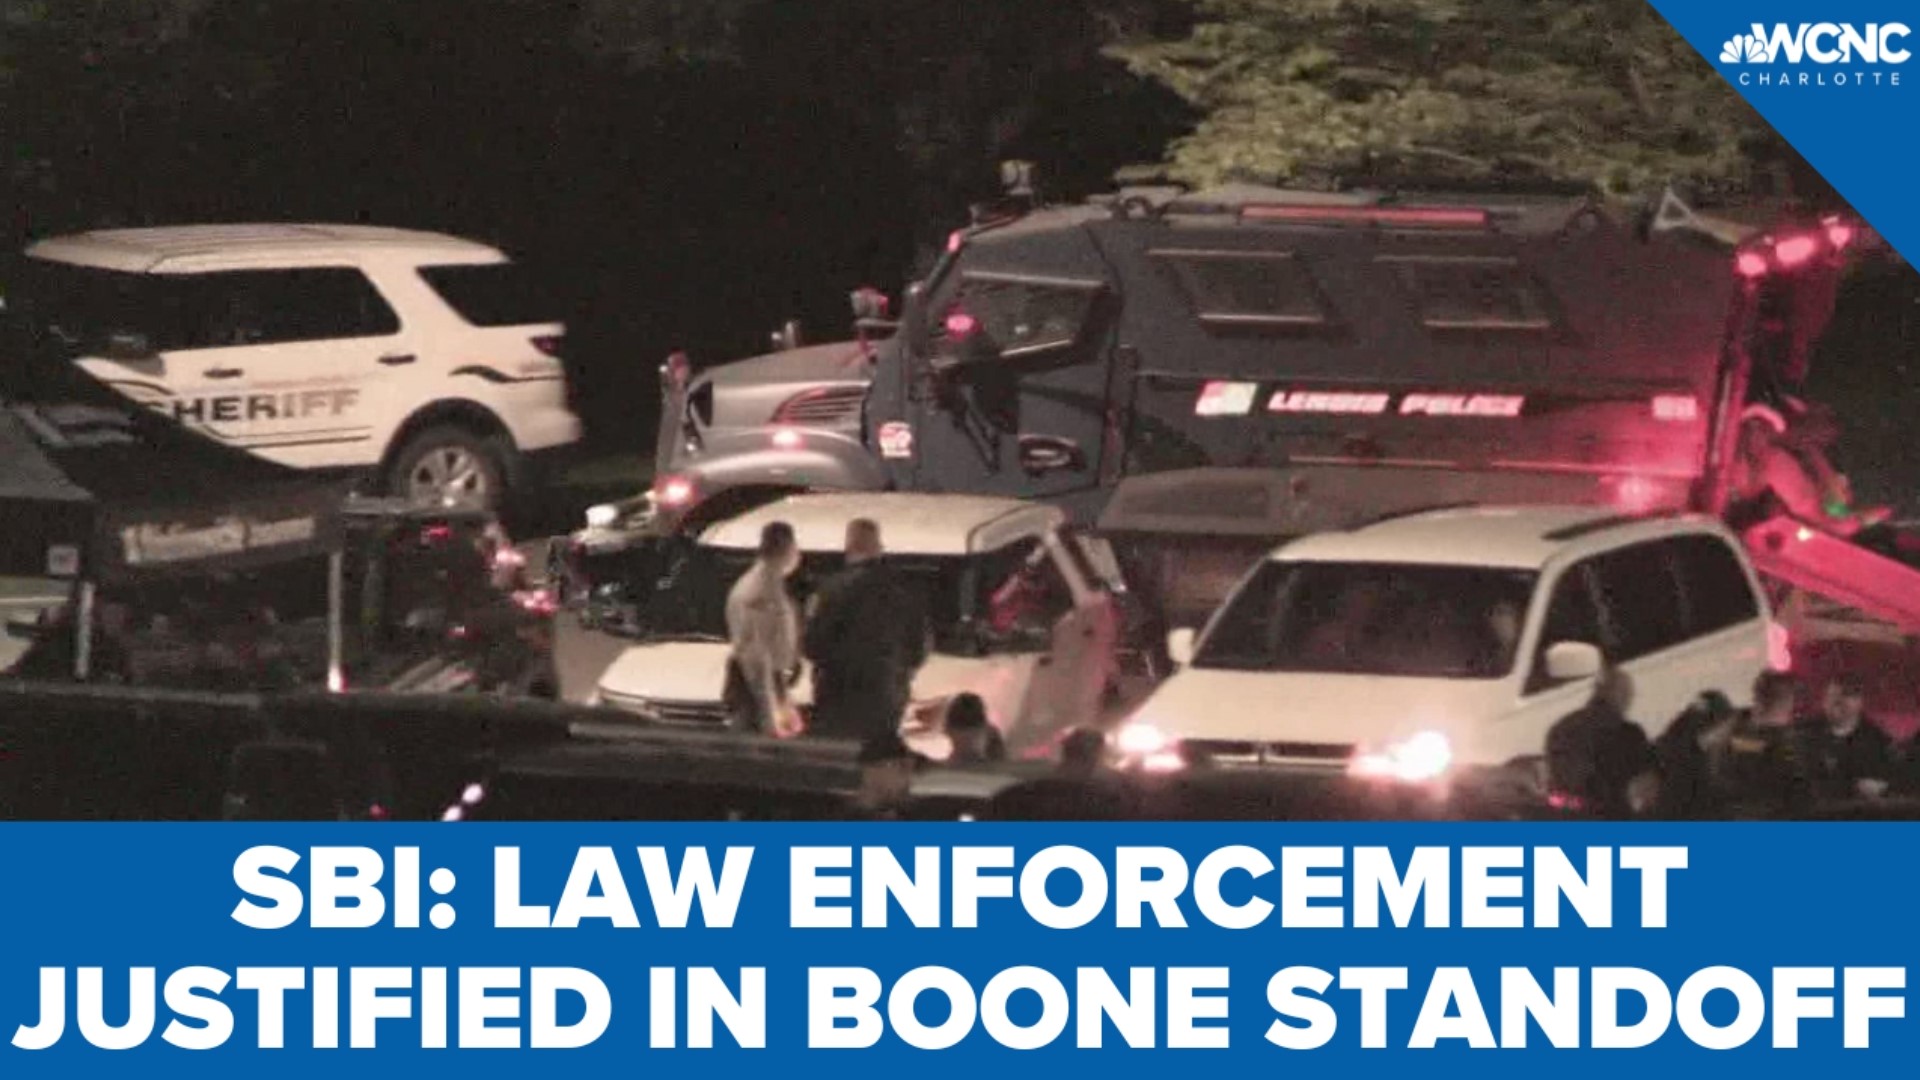 A welfare check in Boone on April 28, 2021, turned into a deadly day for the Watauga County Sheriff's Office, after two of their own died in the line of duty.